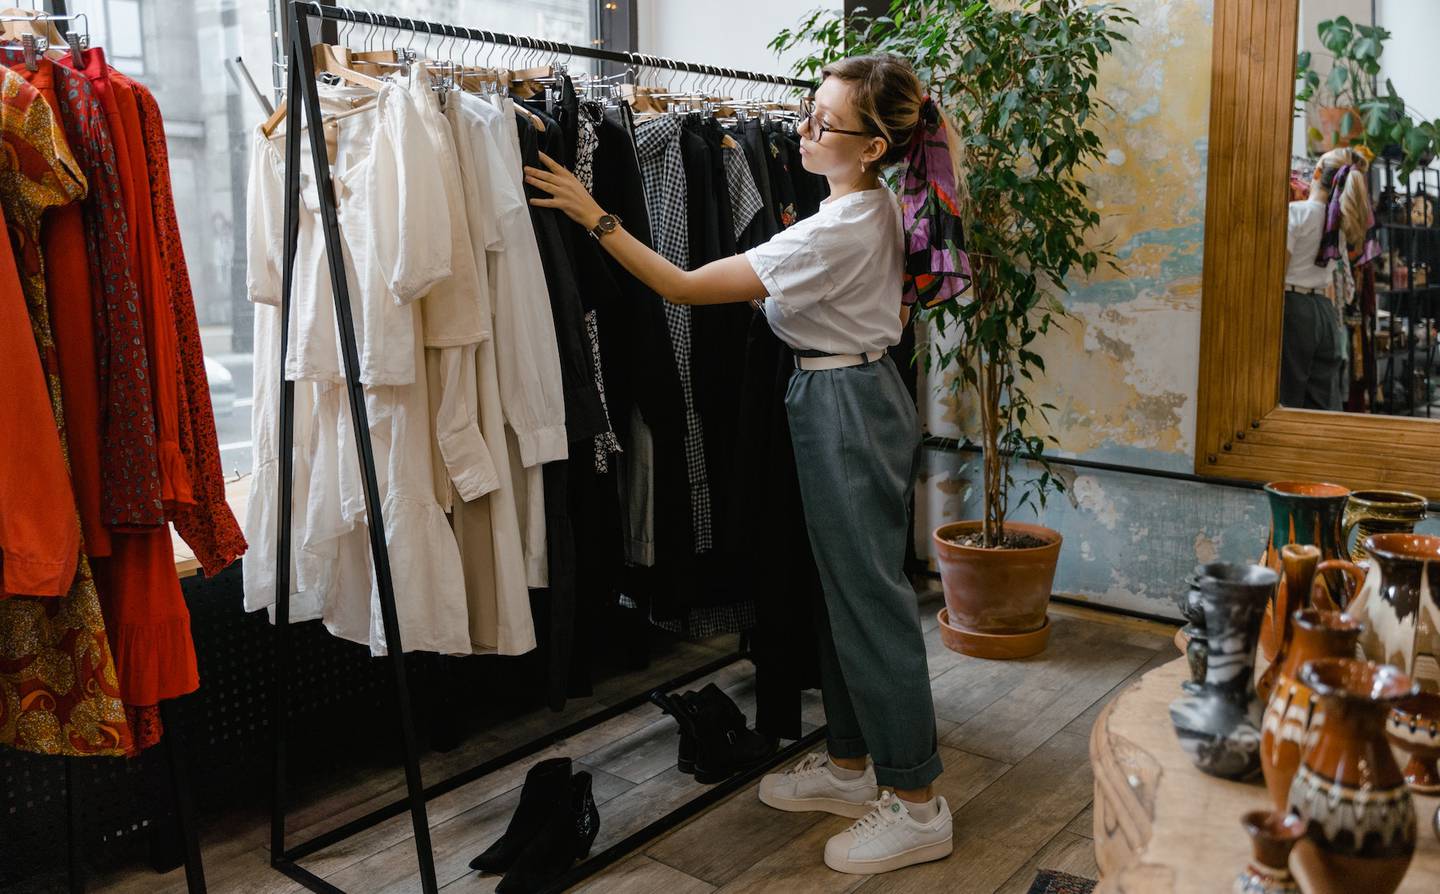 A fashion retail professional at work.